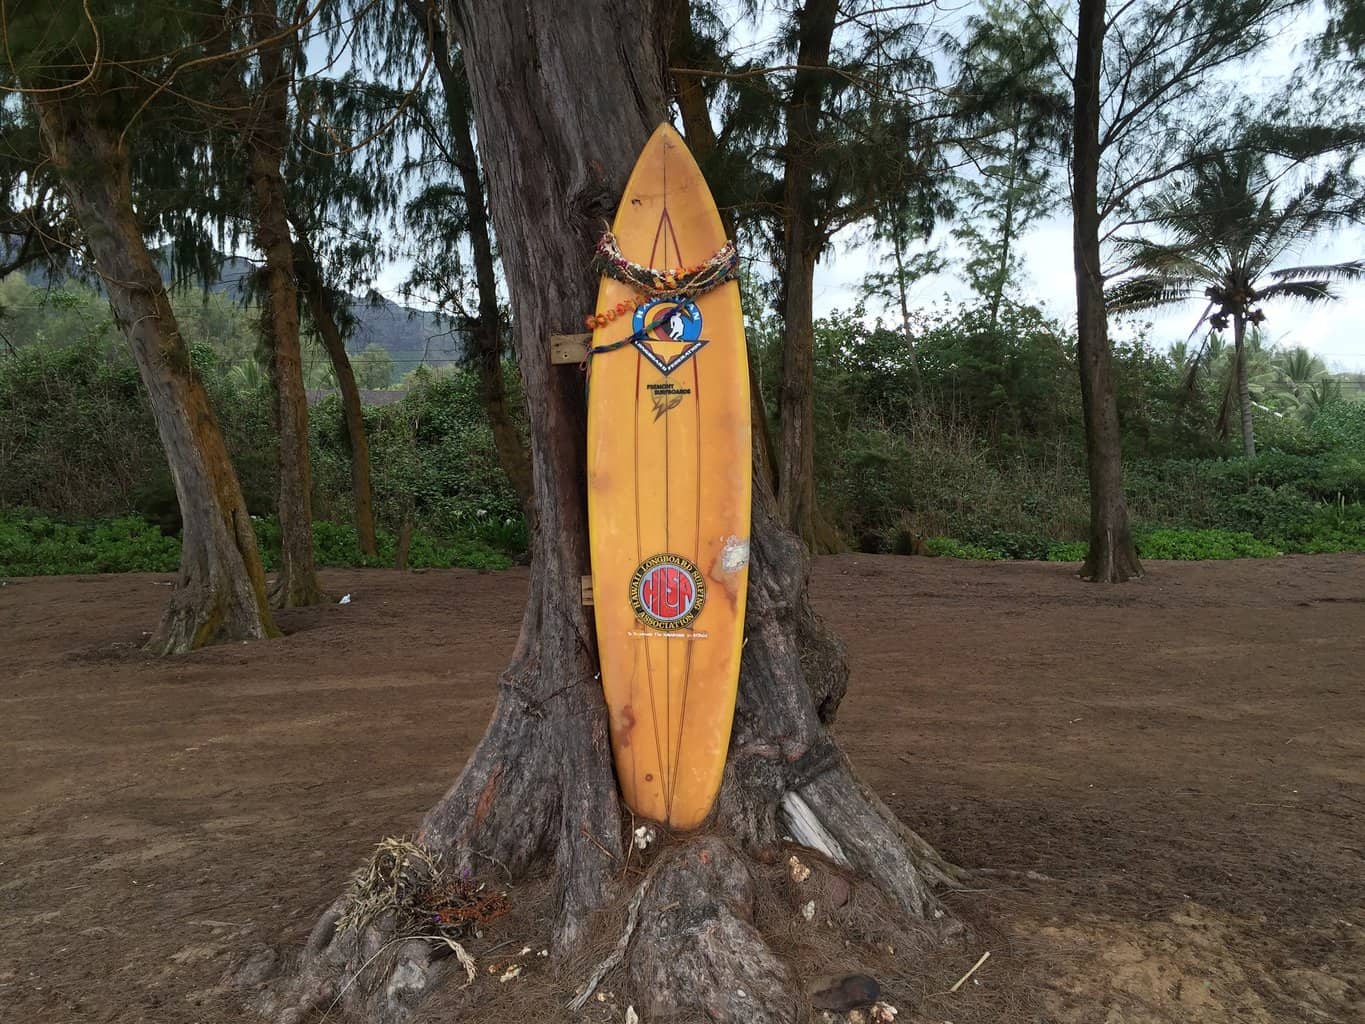 Surfboard tied to tree